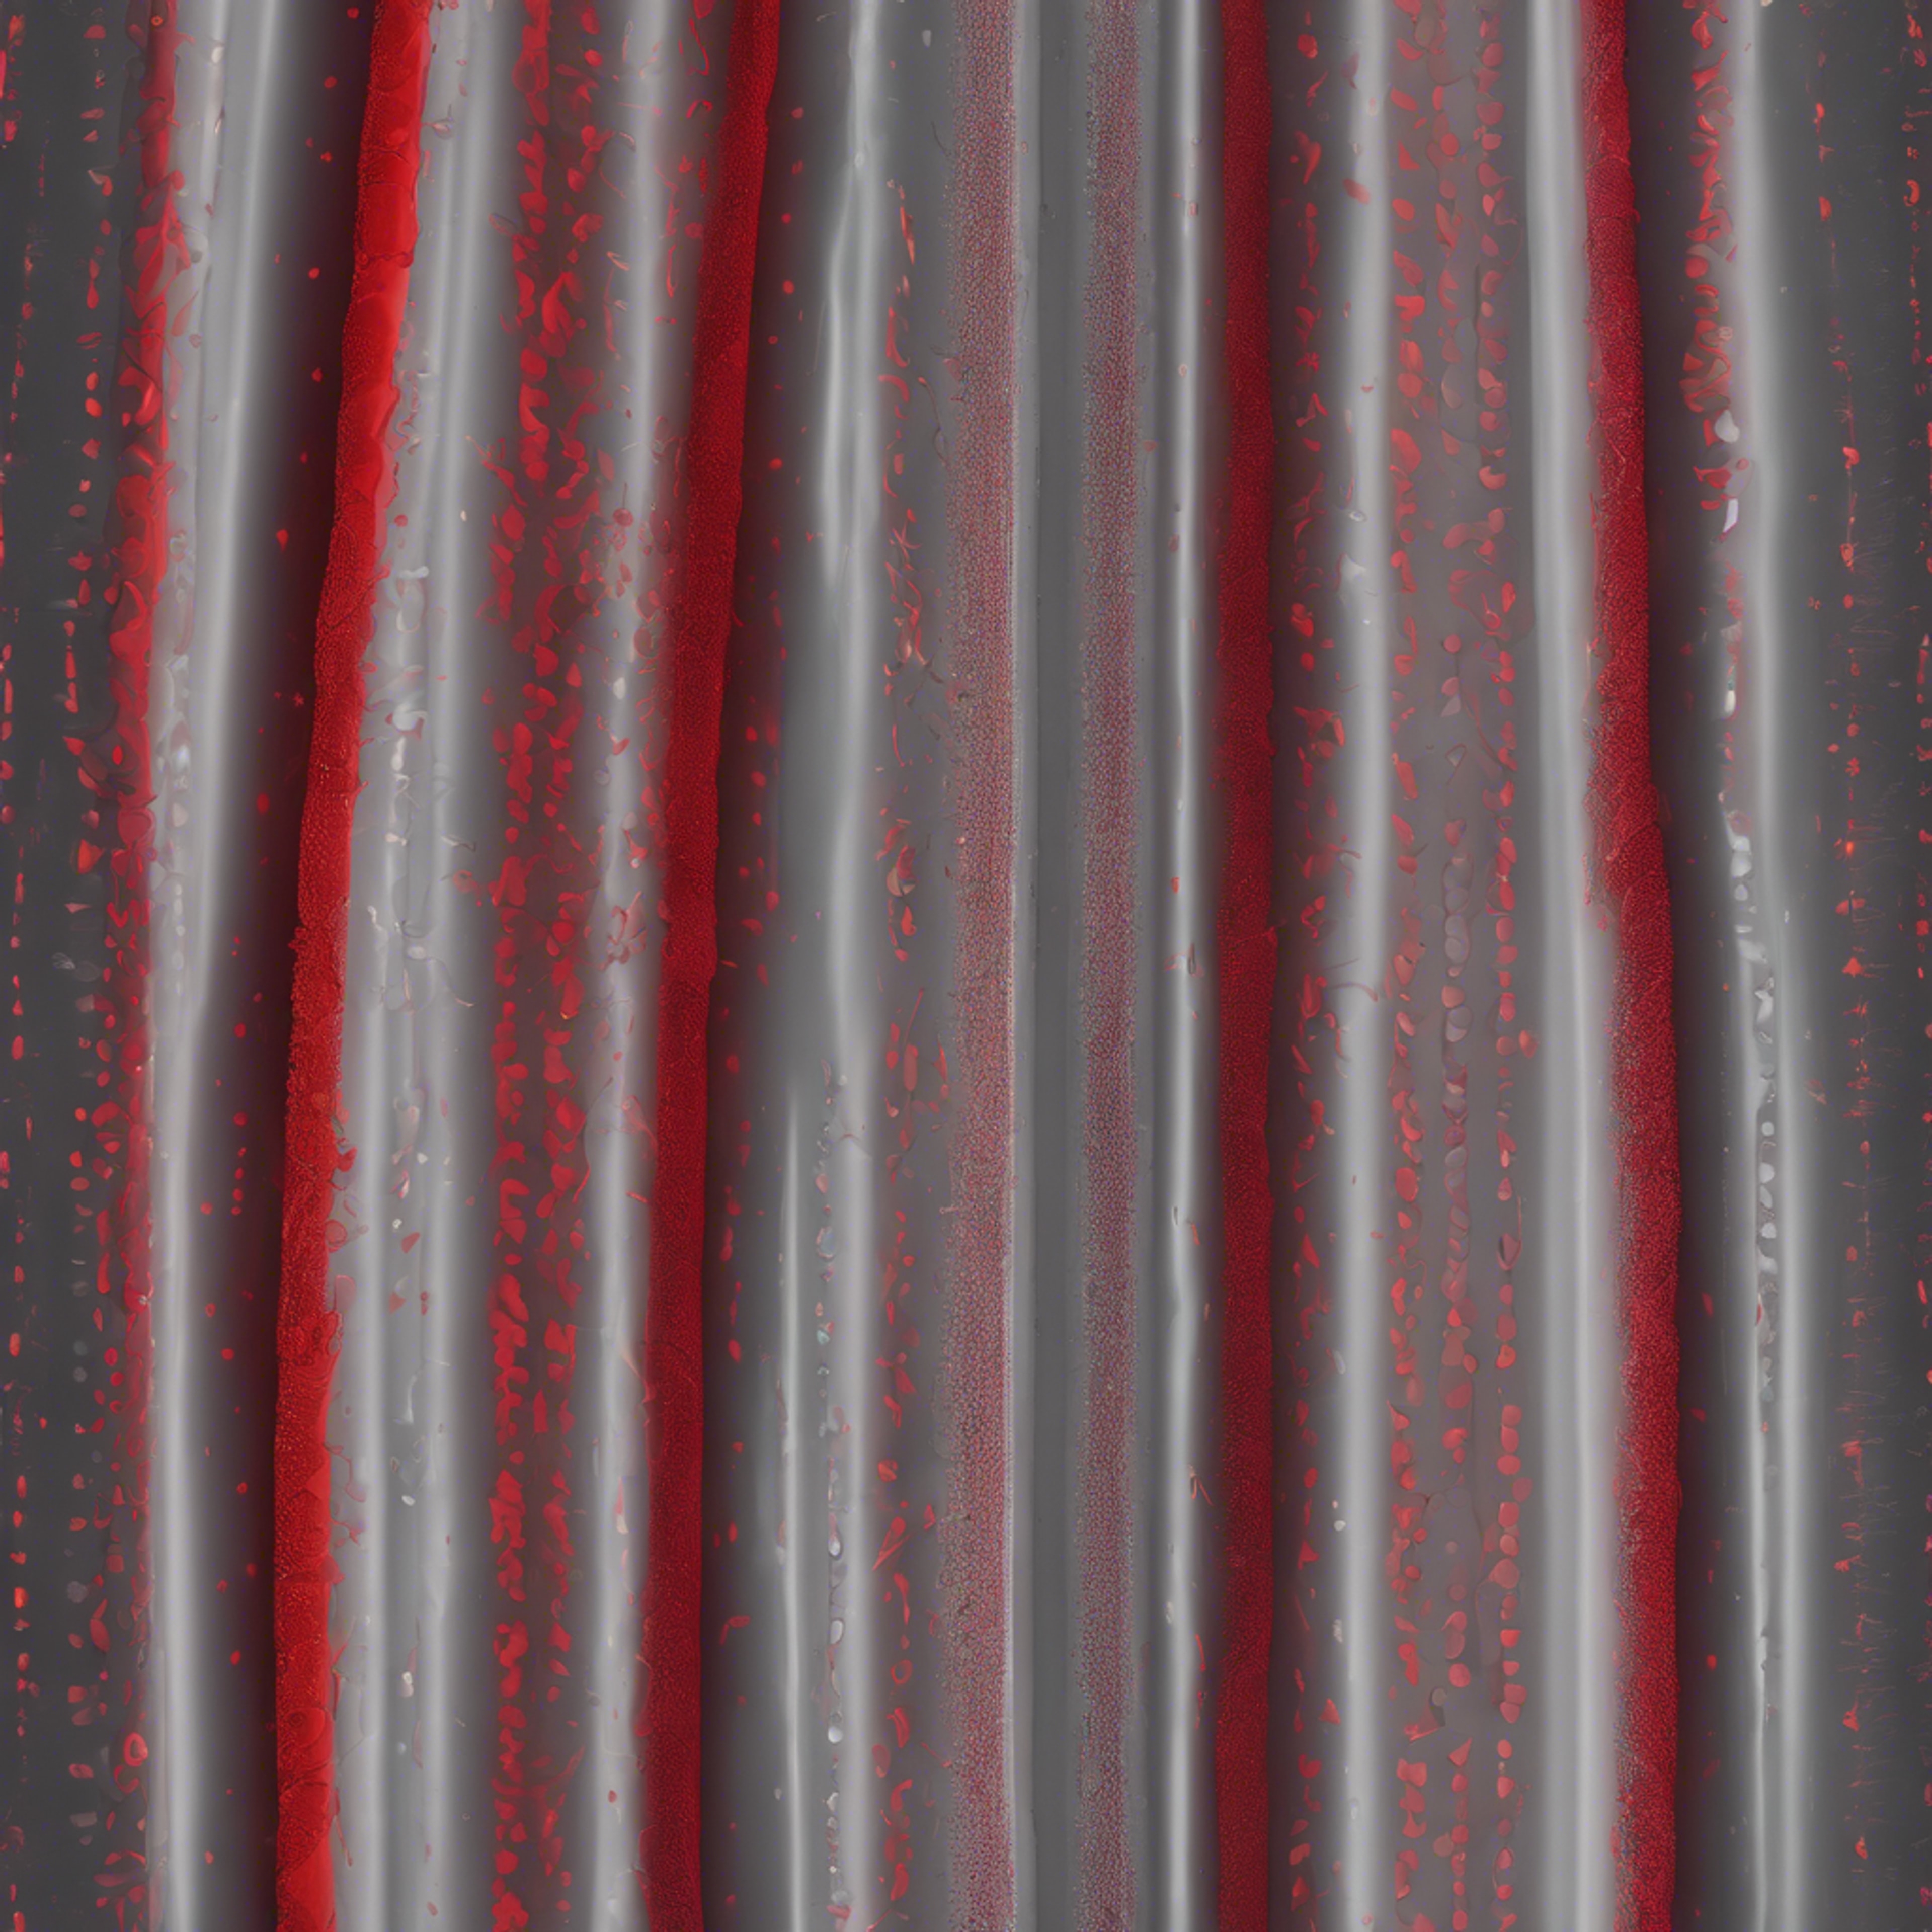 An abstract pattern with hallucinogenic red and grey gradients blending into each other. Tapeta na zeď[5c97b162f4f748b39a07]